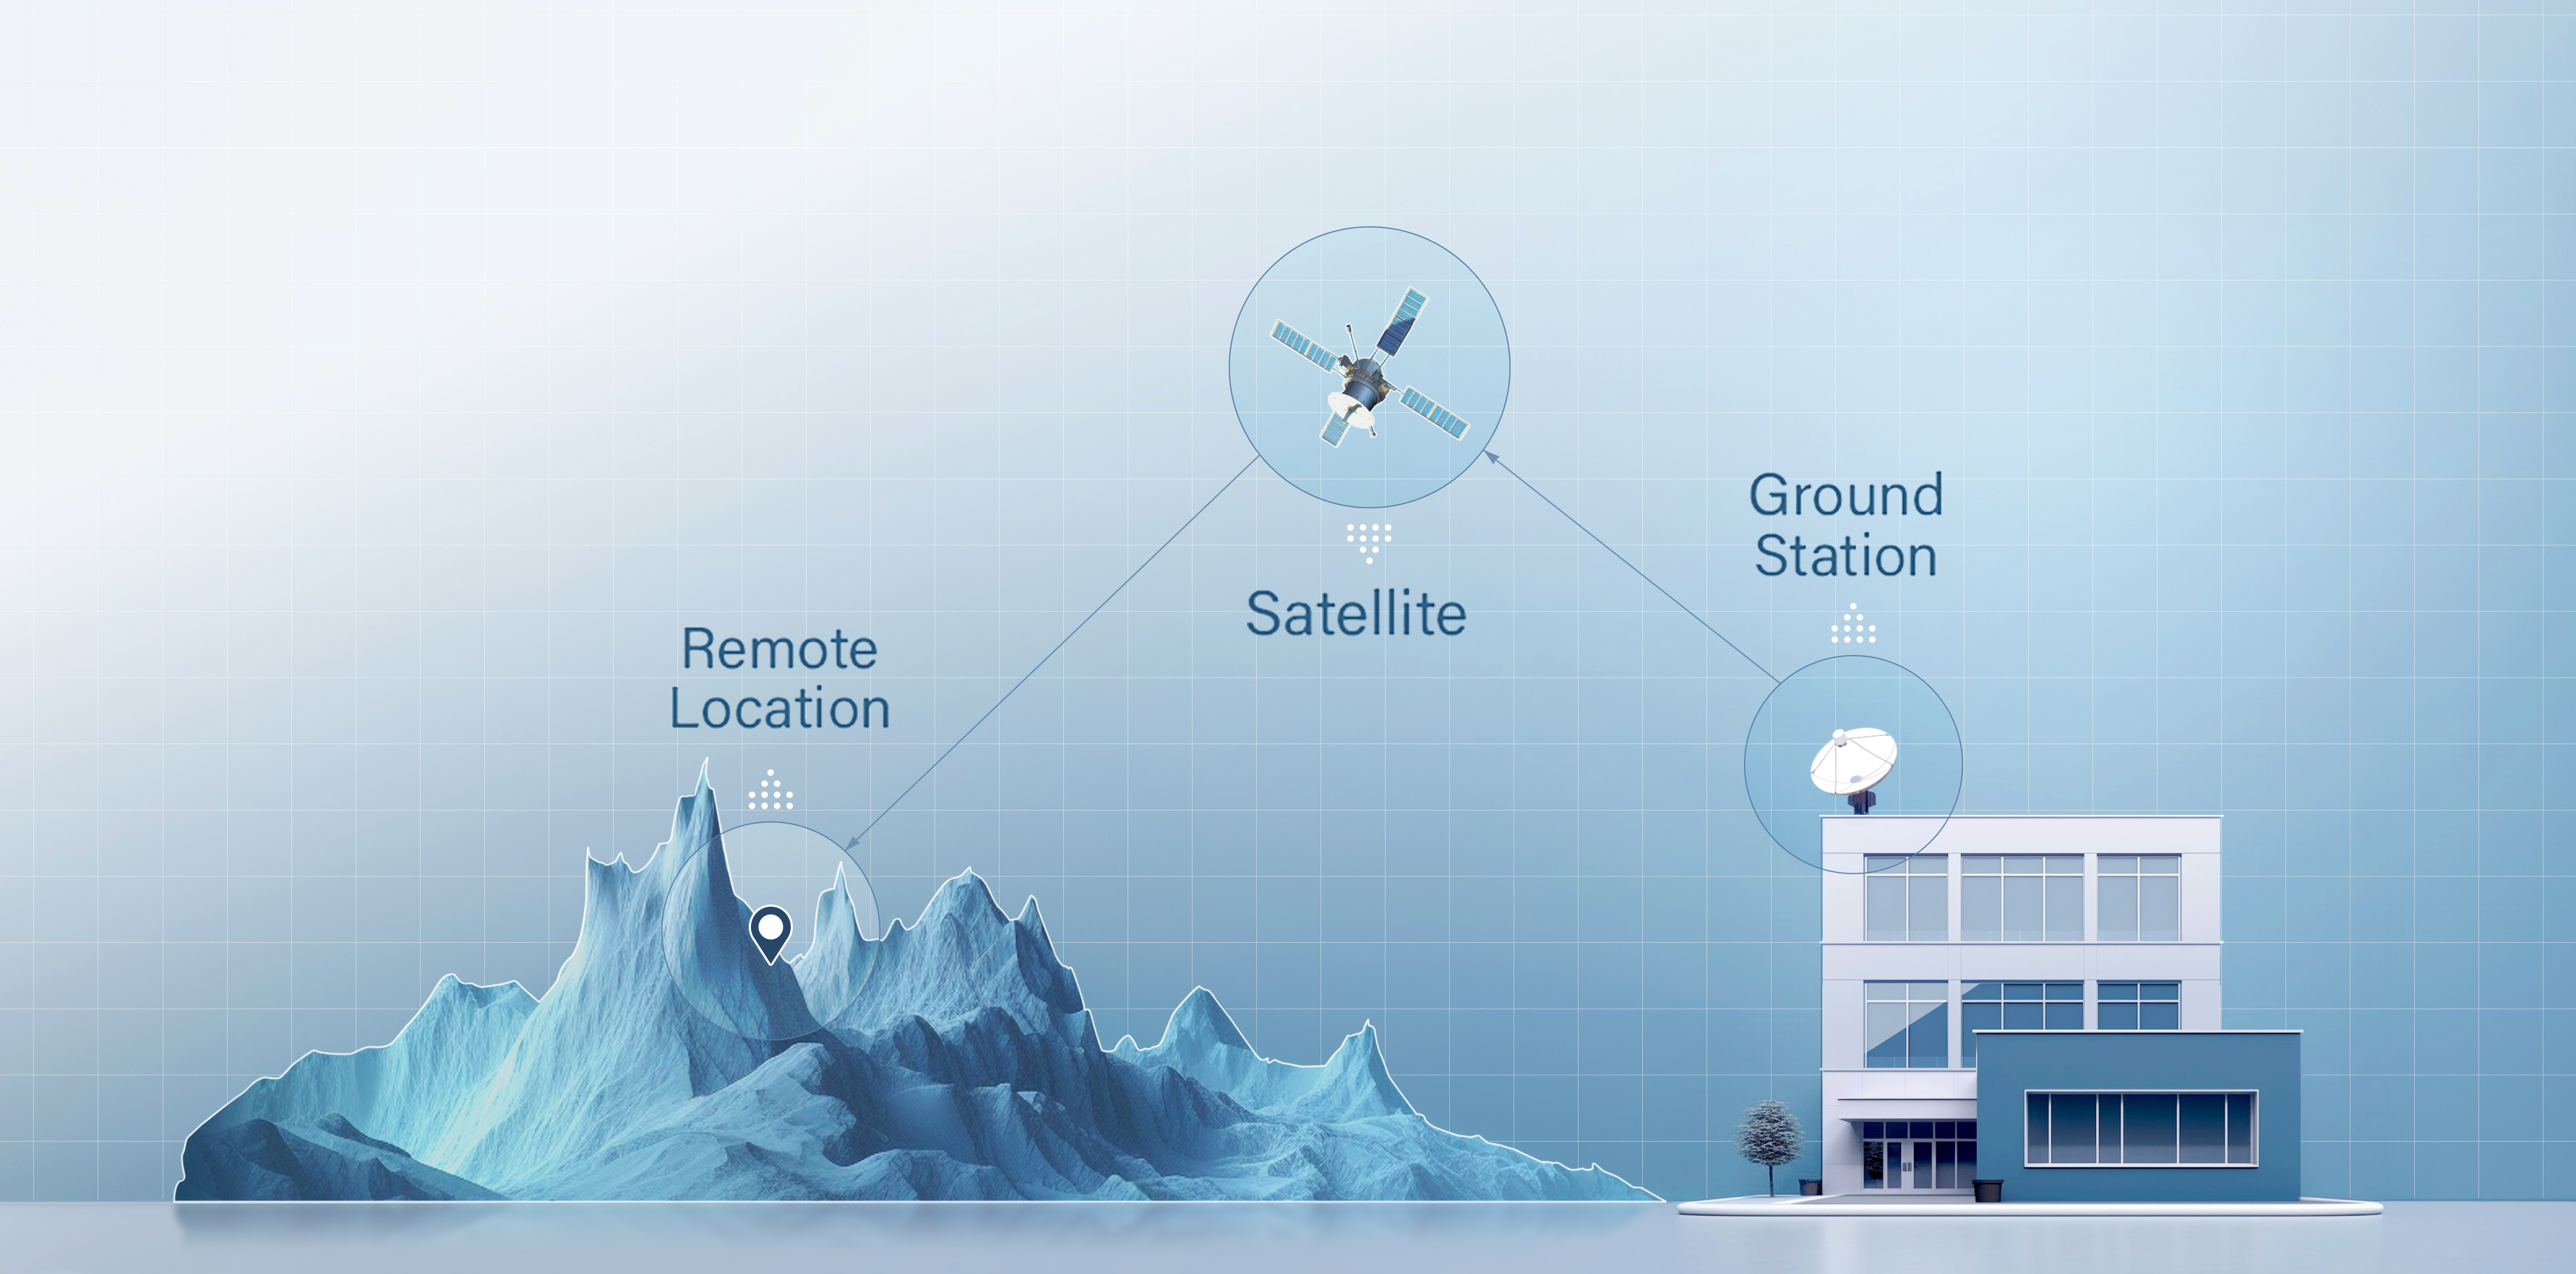 VSAT diagram with ground station, satellite, and remote location